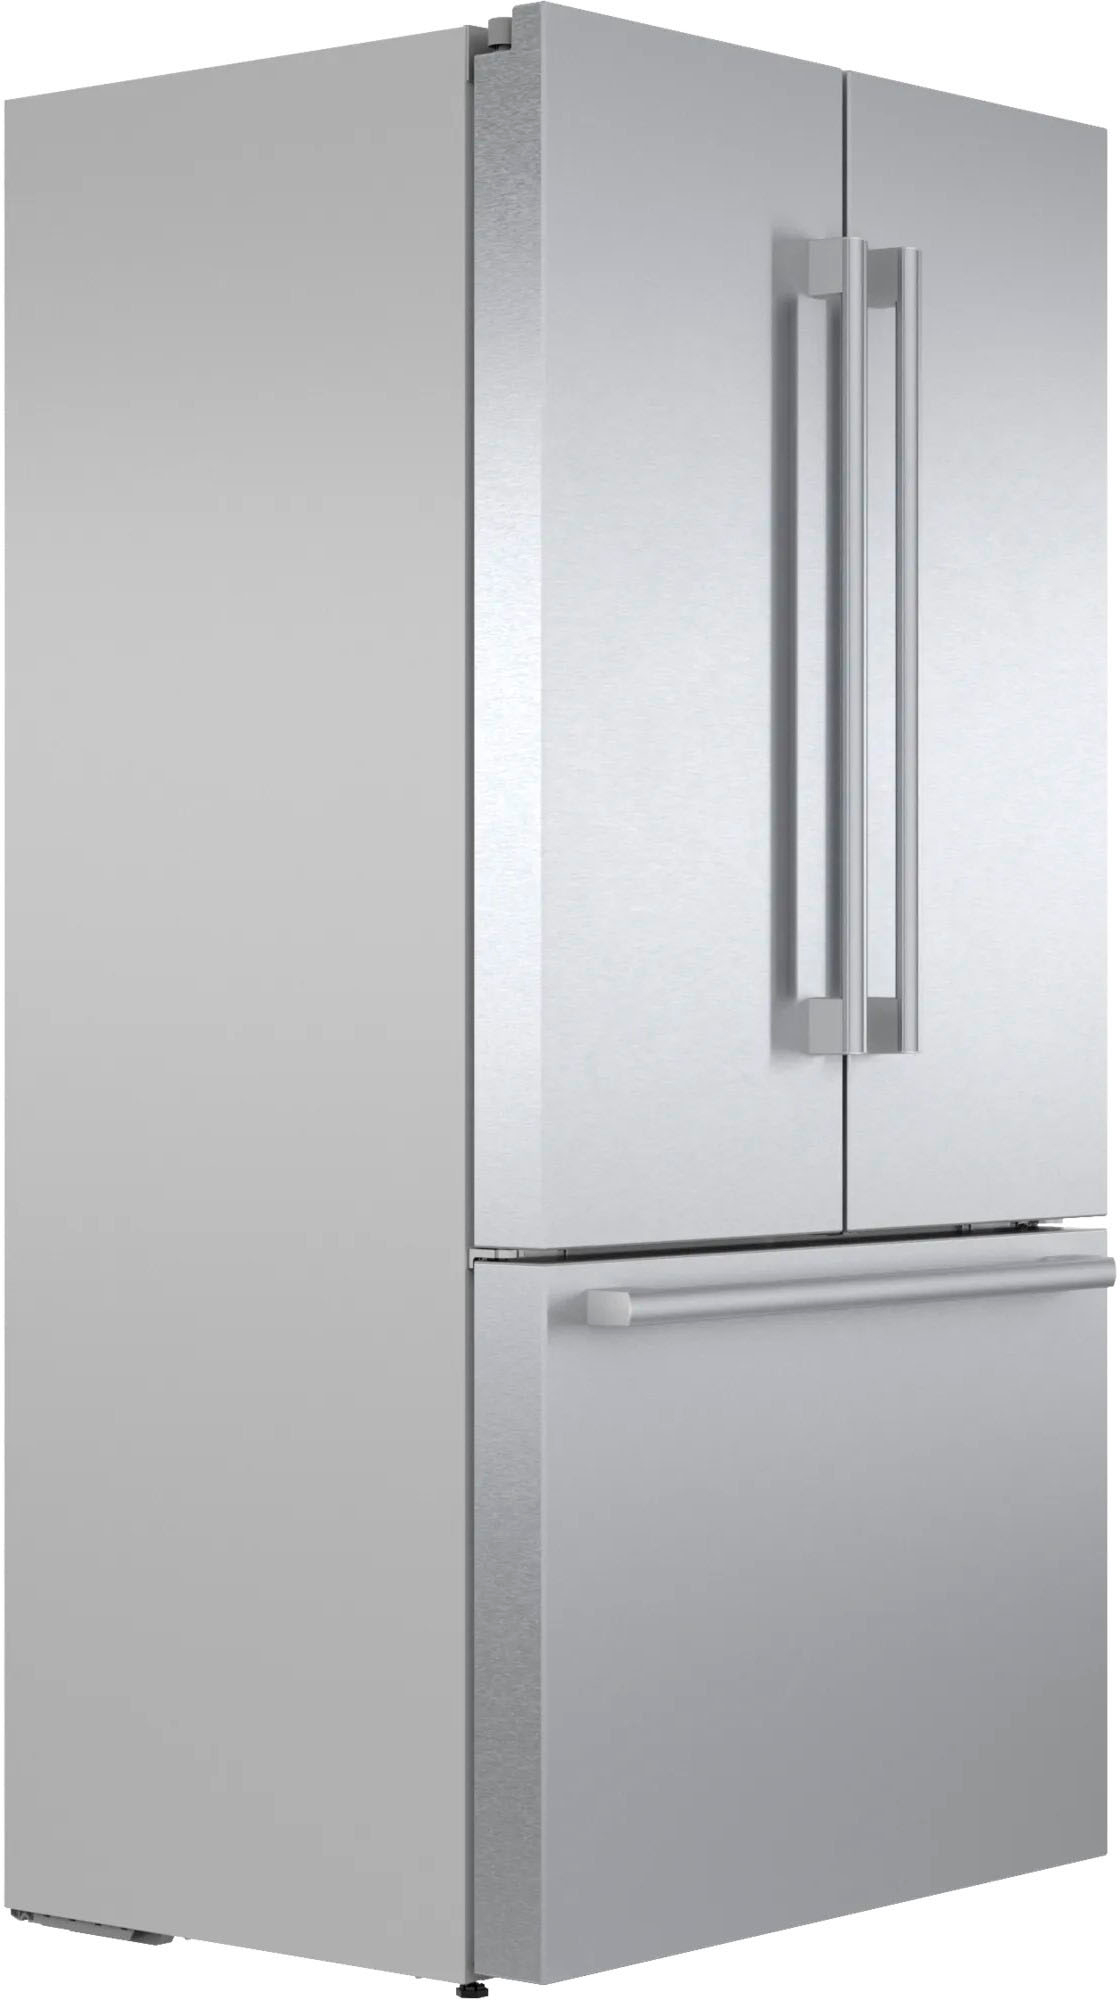 Angle View: Insignia™ - 20.1 Cu. Ft. French Door Counter-Depth Refrigerator with Water Dispenser - Stainless steel